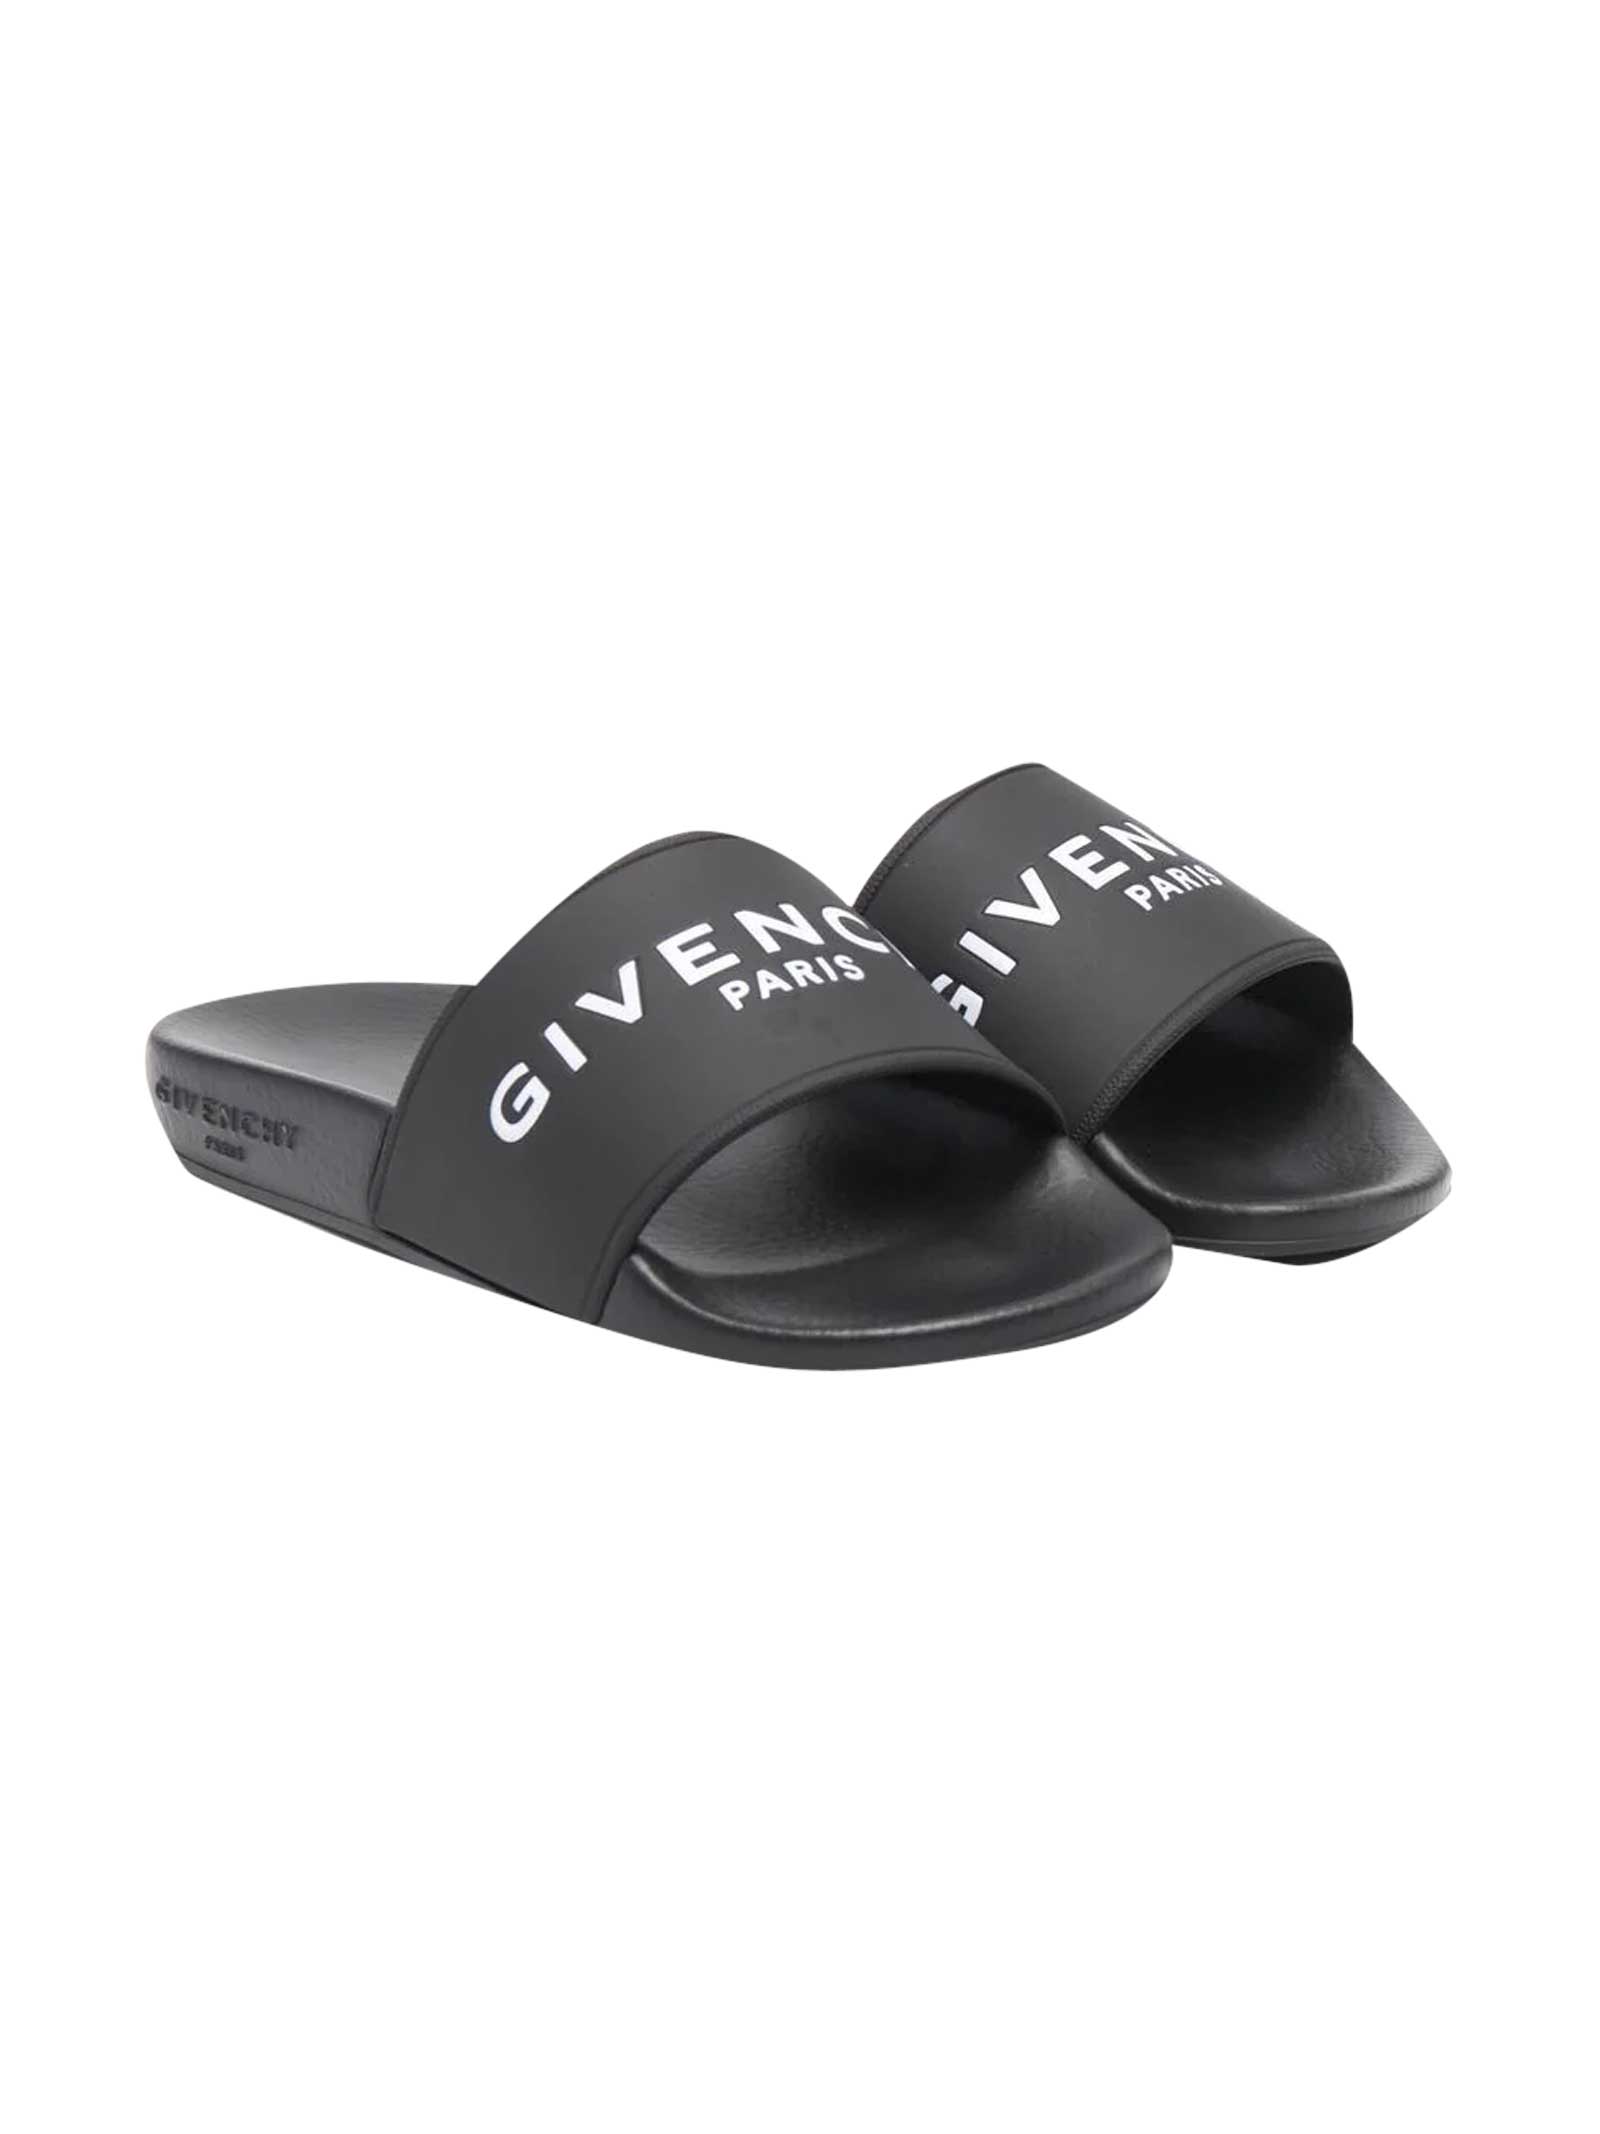 Givenchy Black Slippers With White Logo